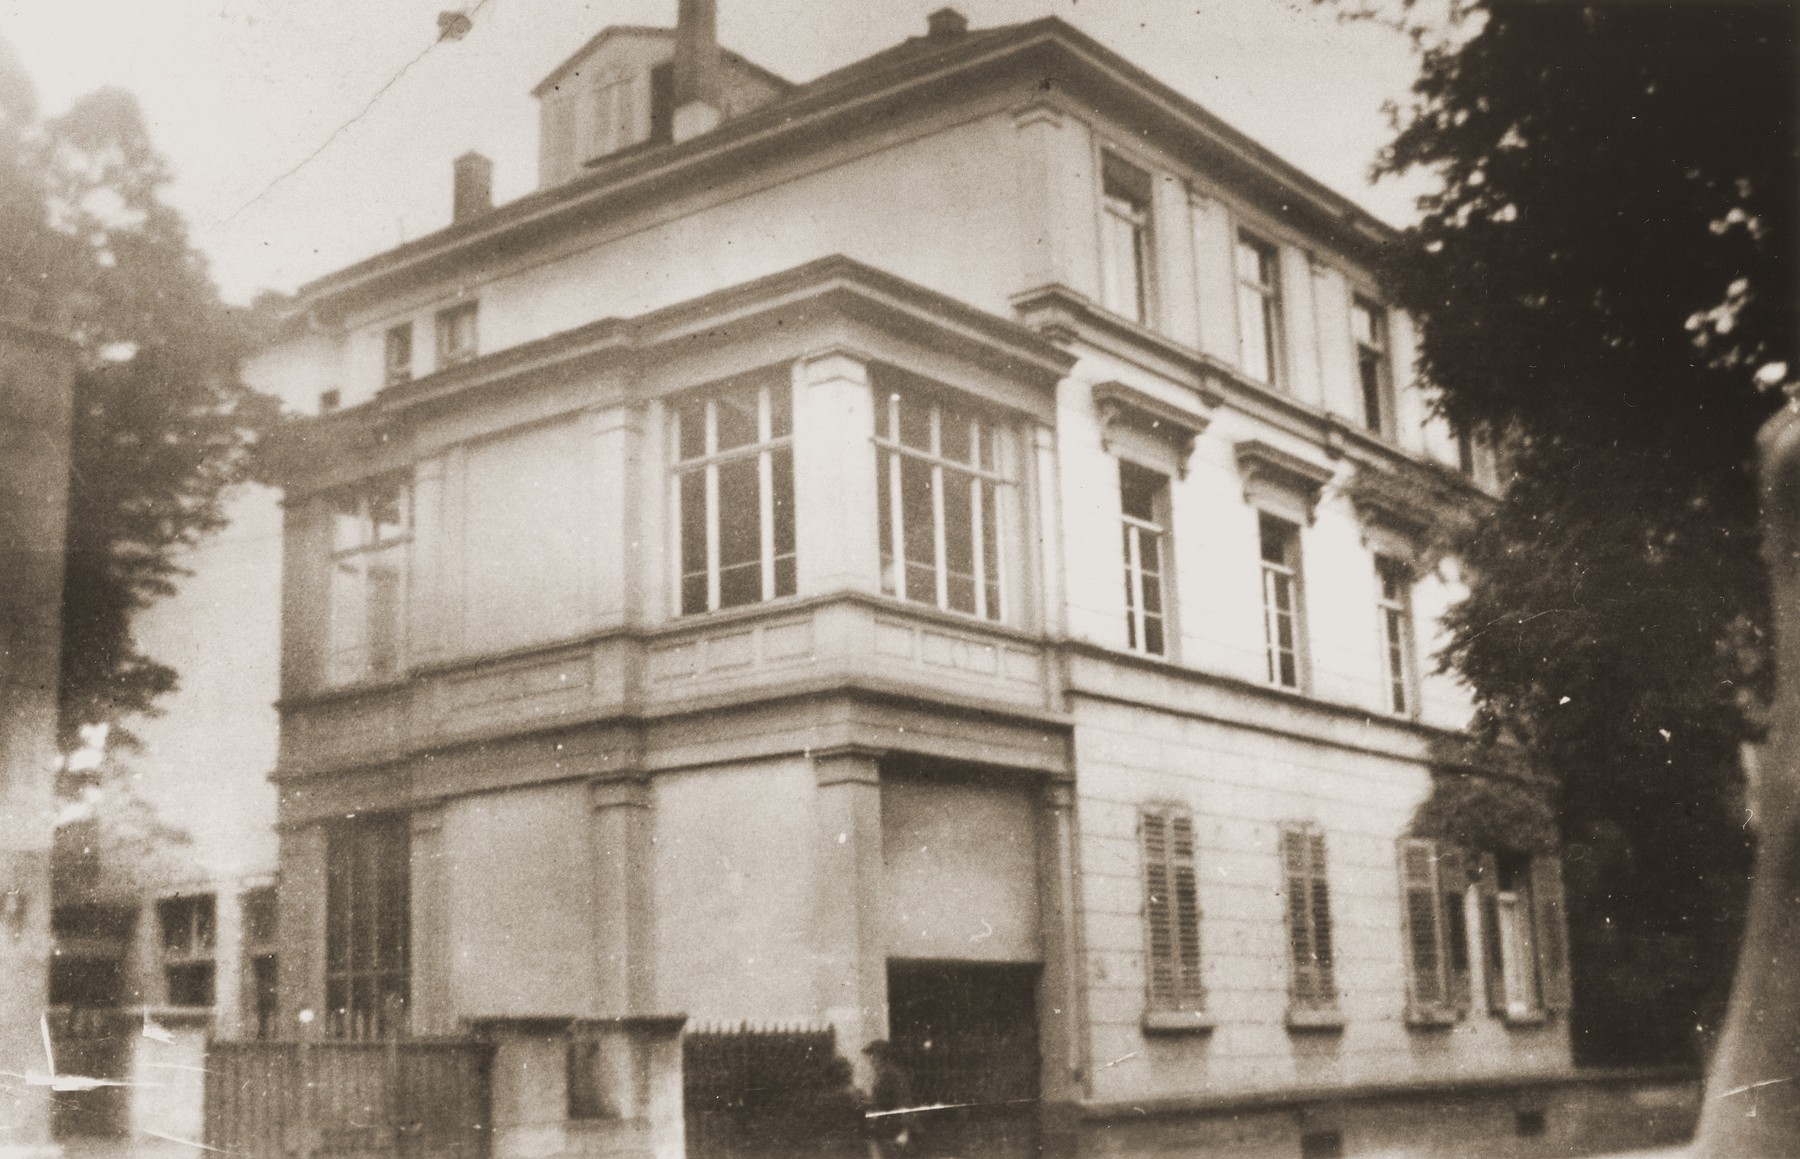 View of the Breuer yeshiva in Frankfurt am Main.  

The yeshiva was headed by Rabbi Doctor Joseph Breuer.  After Kristallnacht, the yeshiva was closed down.  Rabbi Breuer moved to Fiume, Italy and from there to New York where he became rabbi of the mostly German Jewish congregation, Kehillat Jeshurun.